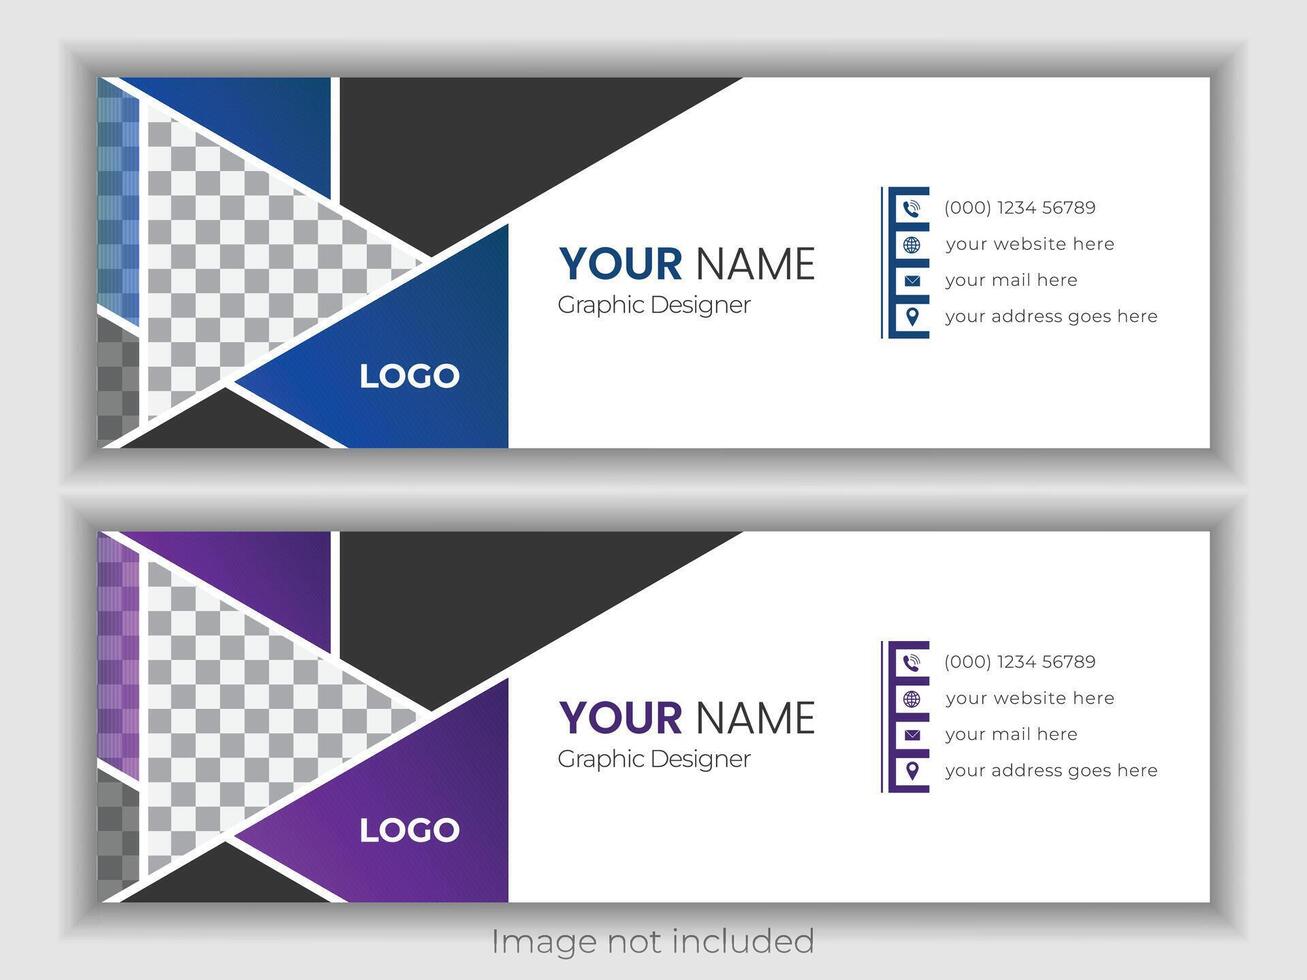 Email signature design in purple and blue color vector